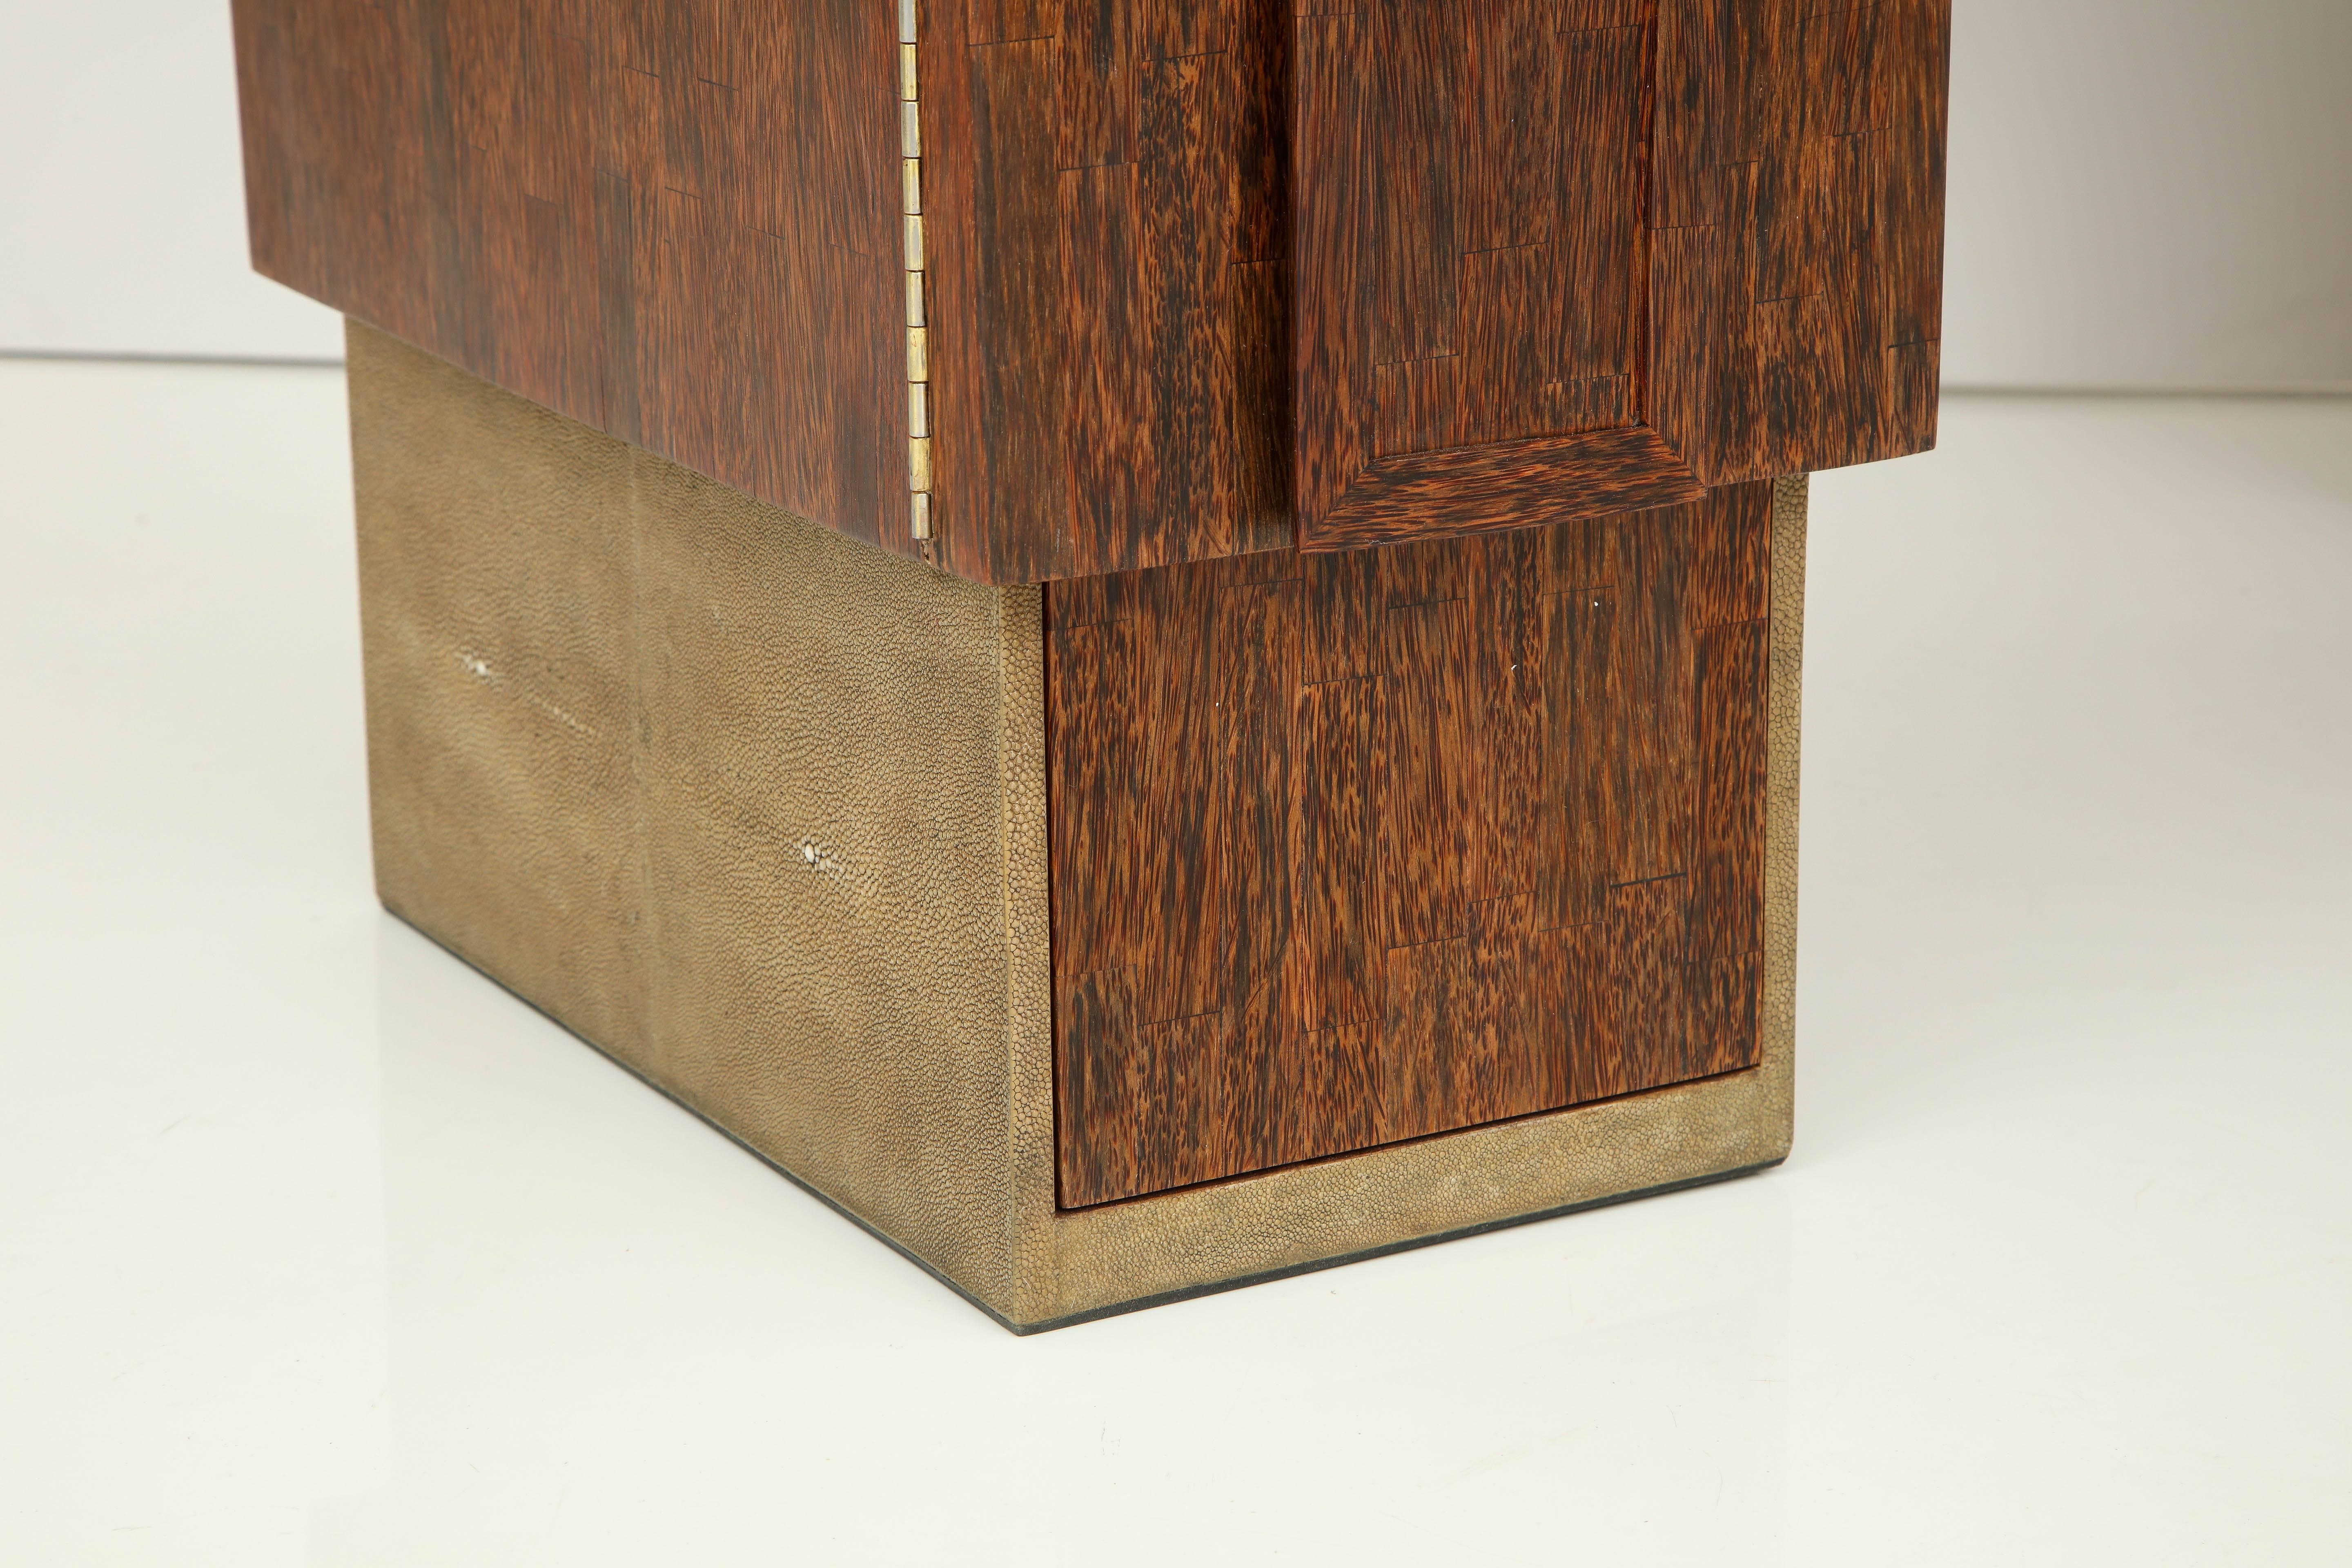 Philippine Desk, Shagreen and Dark Palm Wood Details, Contemporary, Designed in France